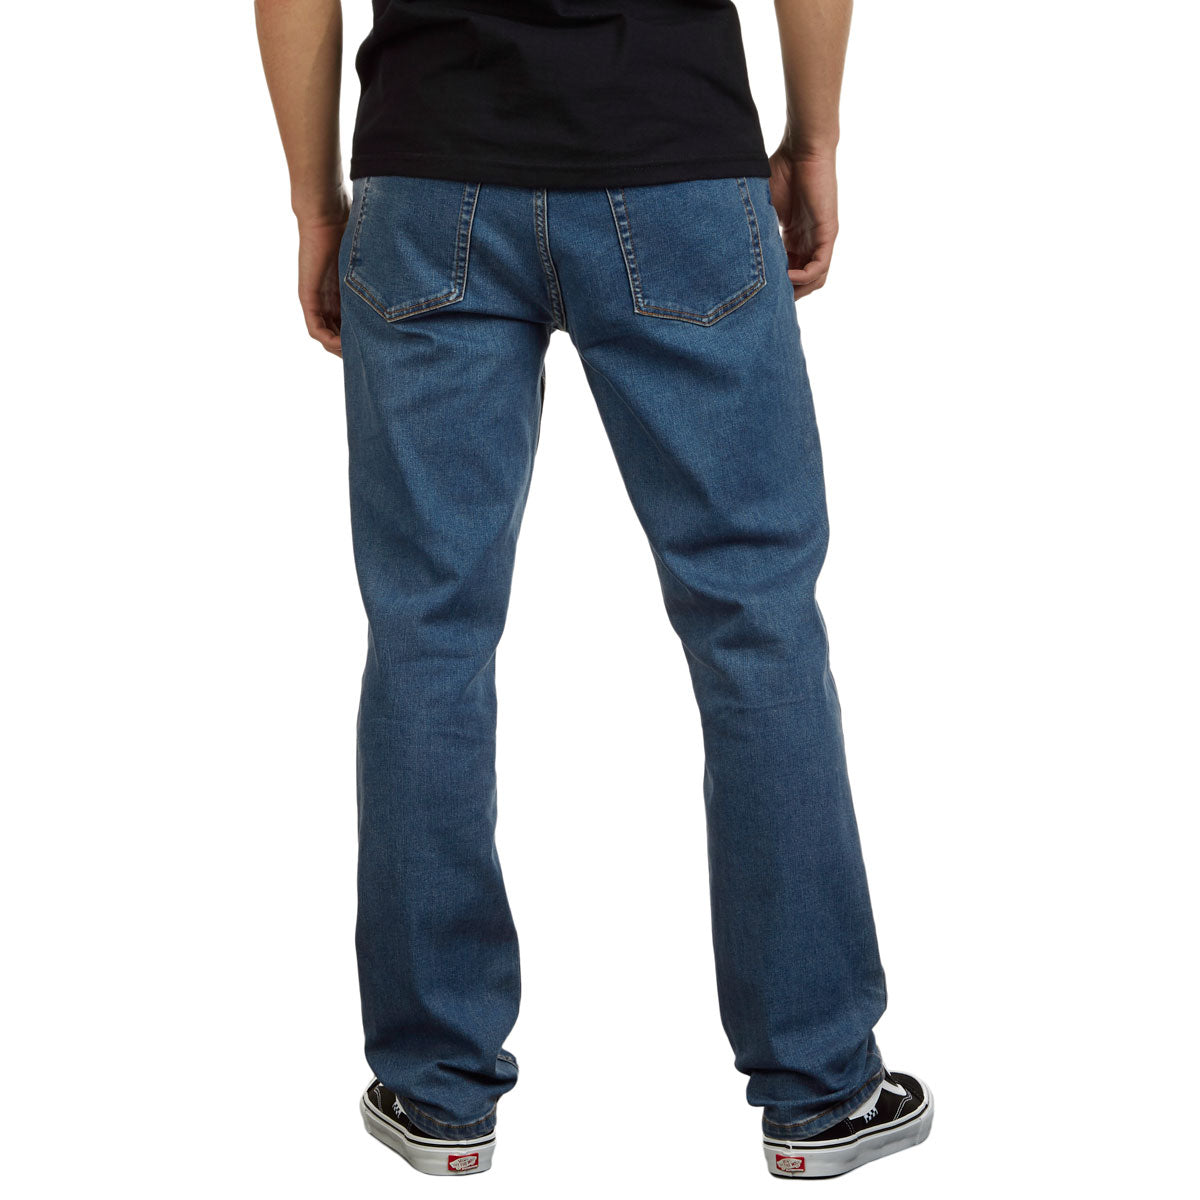 CCS Standard Plus Relaxed Denim Jeans - New Rinse image 3